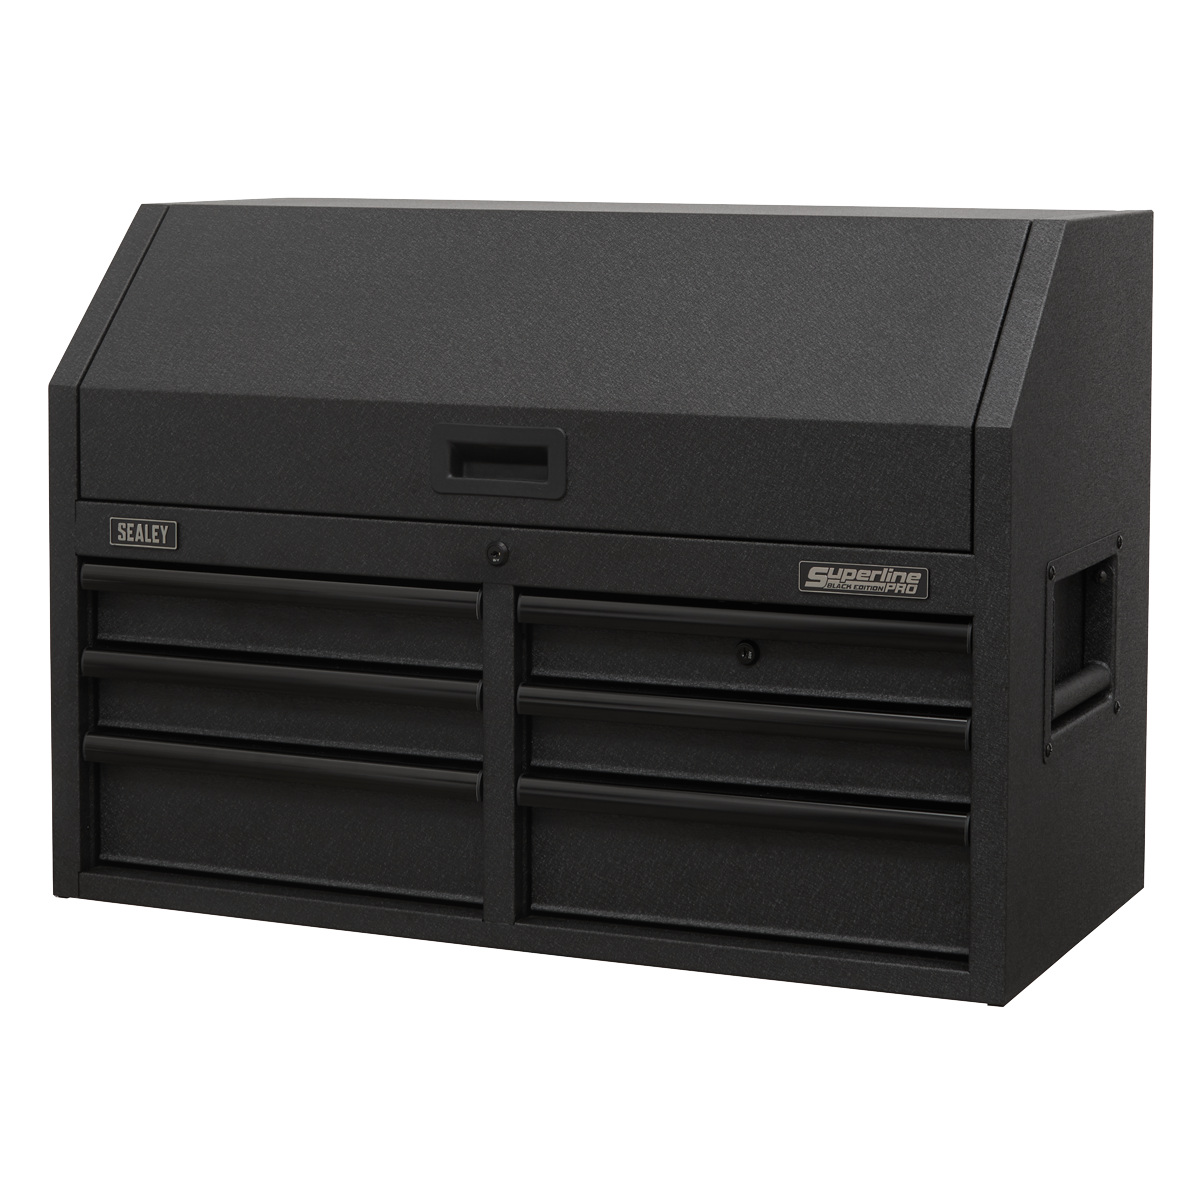 Topchest 6 Drawer 910mm with Soft Close Drawers & Power Strip - AP3607BE - Farming Parts